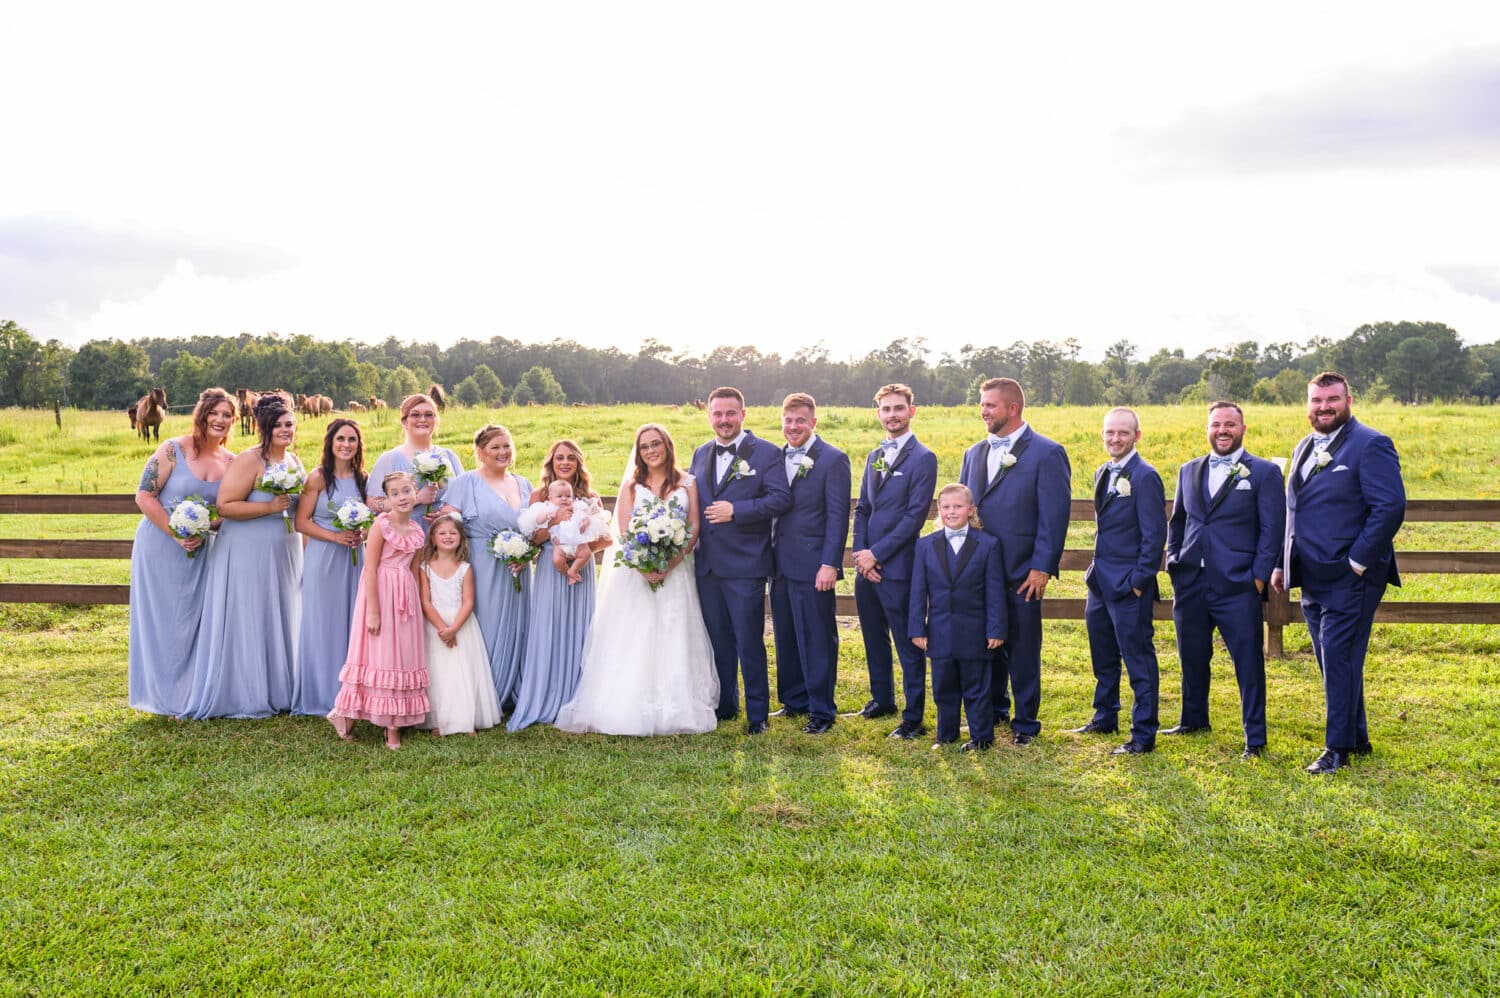 Bridal party by the fences - Wildhorse at Parker Farms